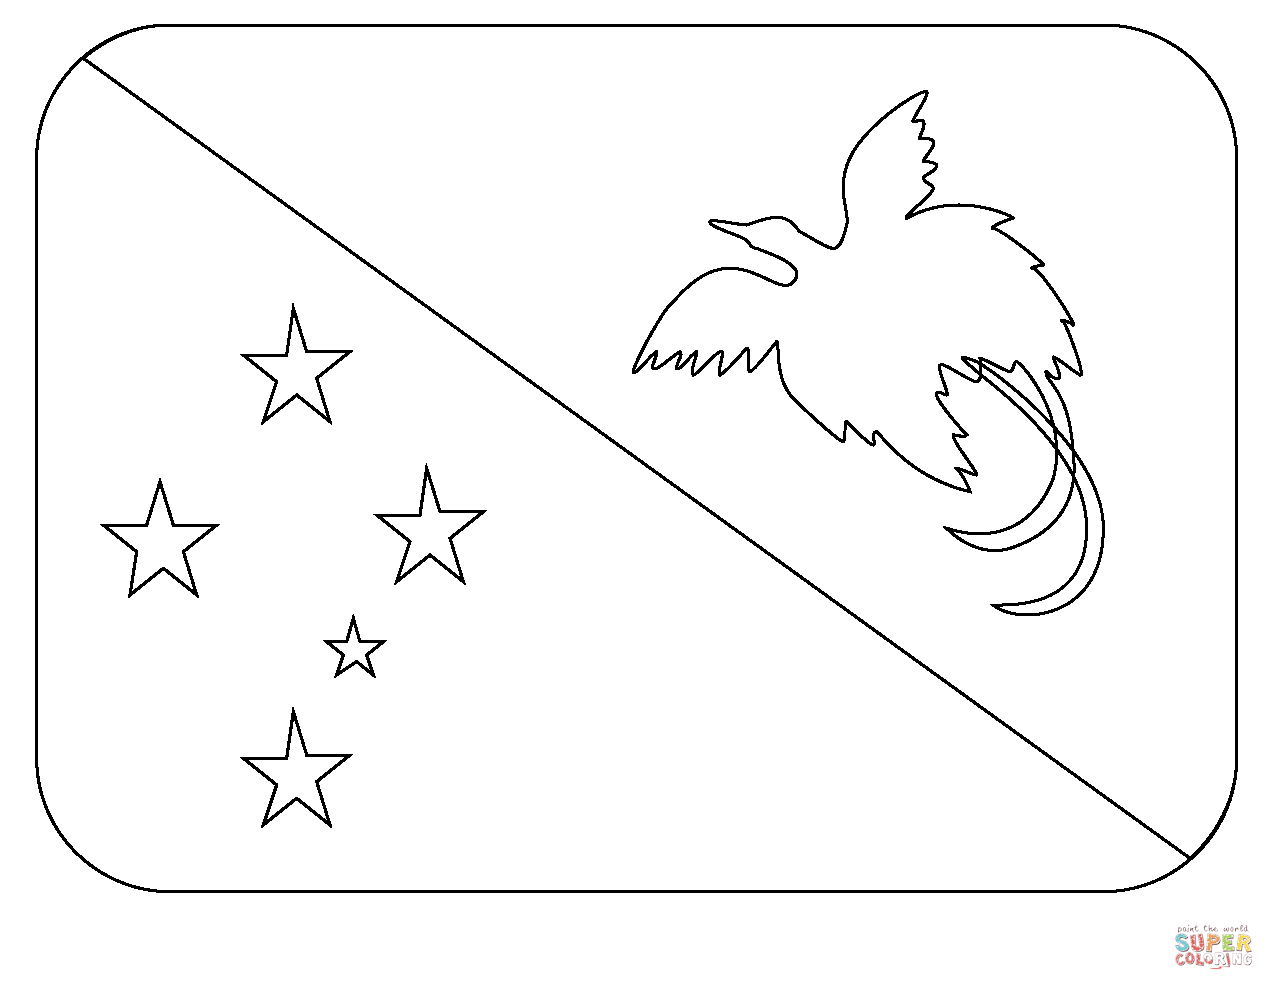 Flag of papua new guinea emoji coloring page free printable coloring pages